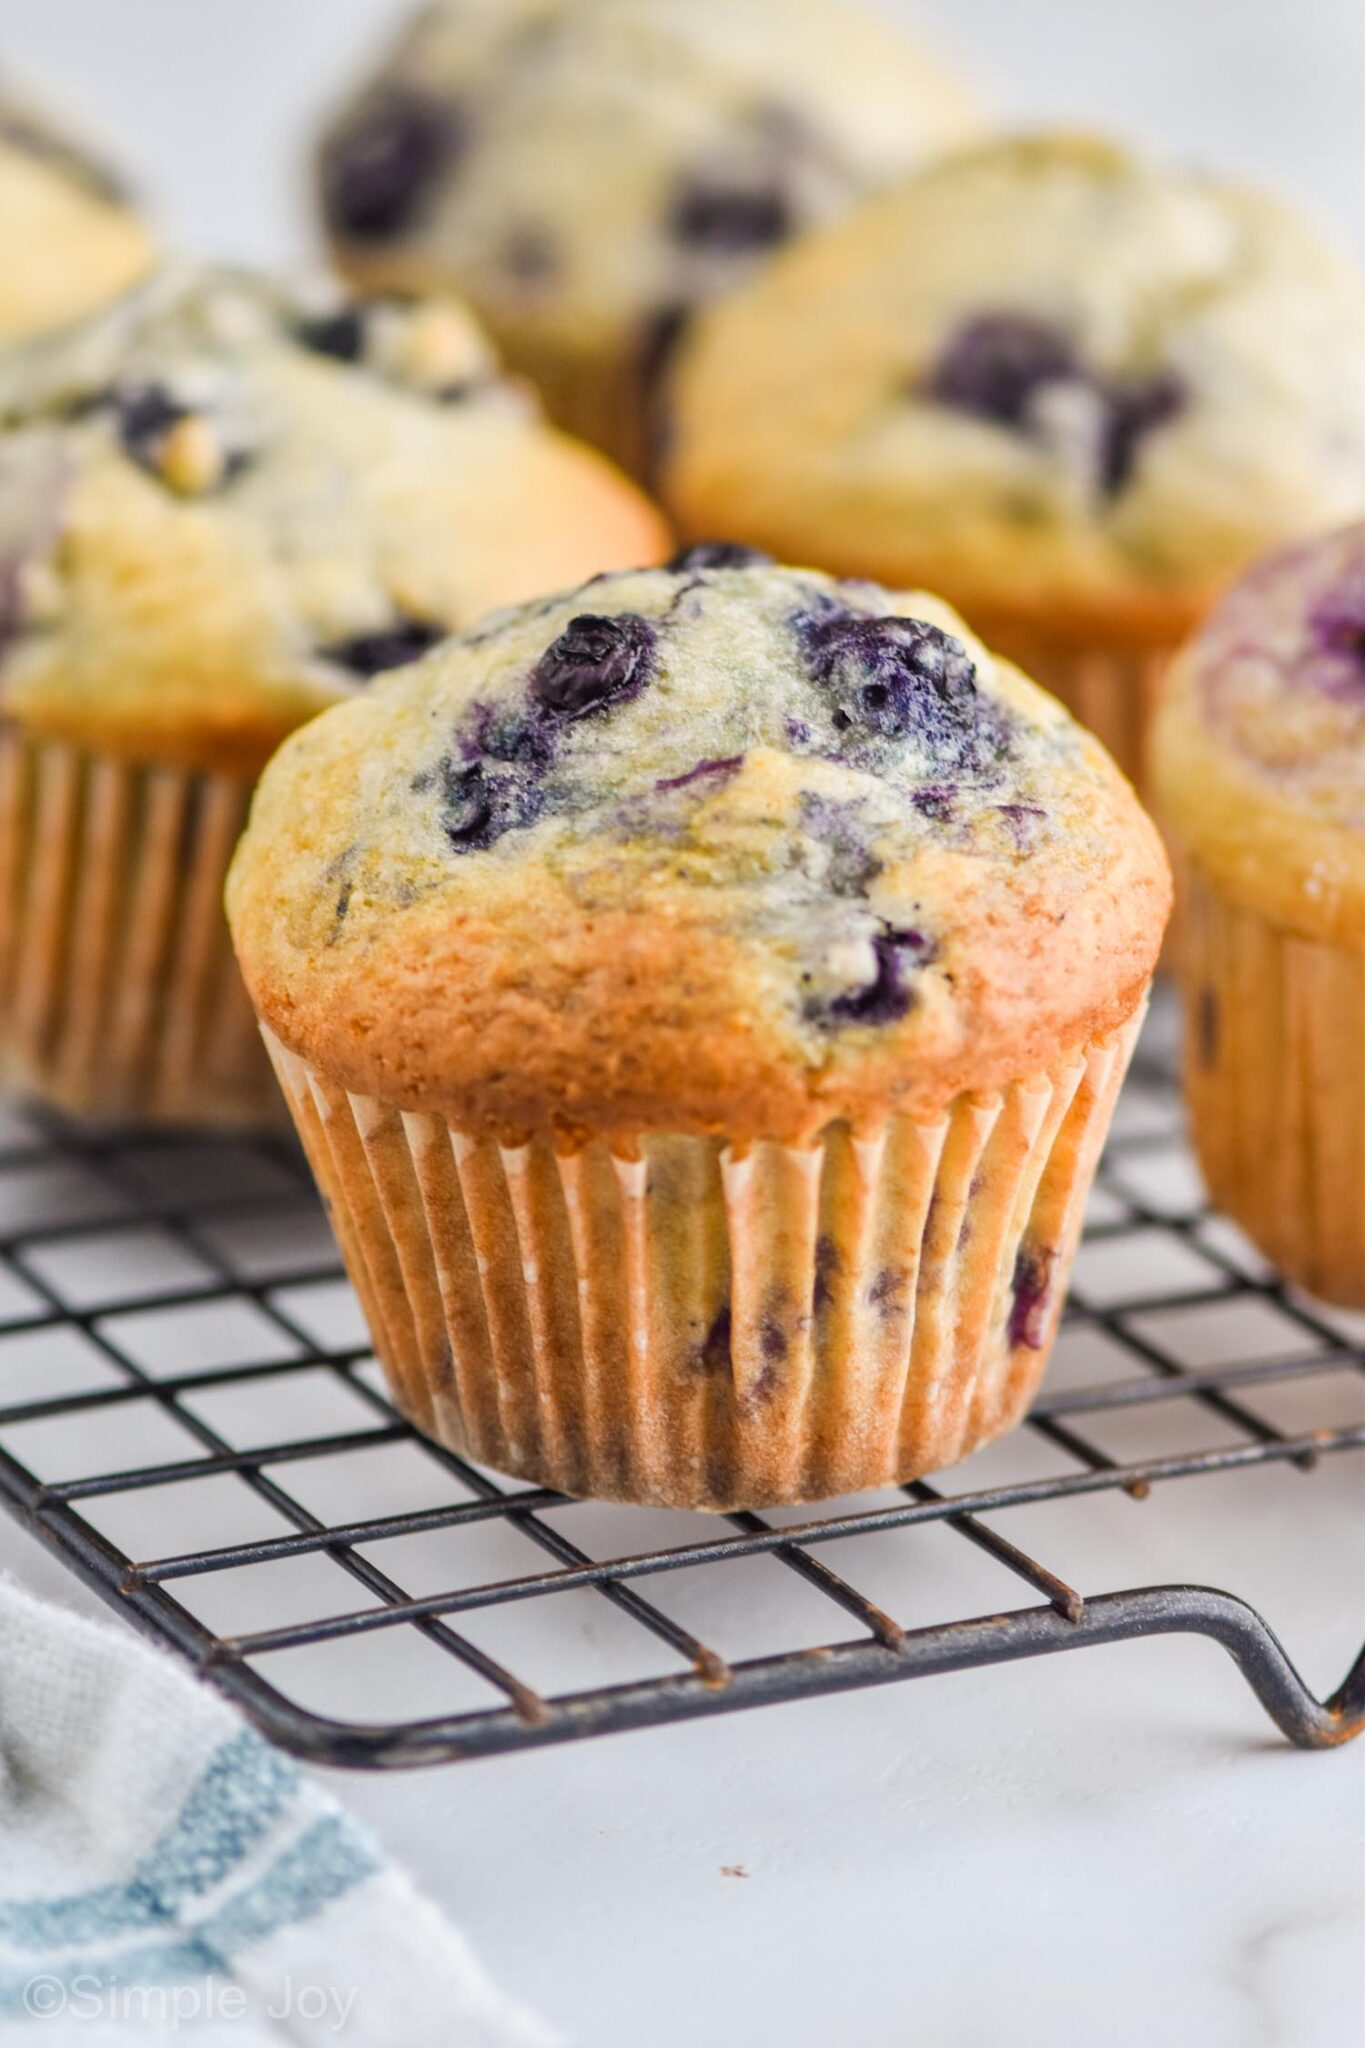 These Low Carb Blueberry Muffins are quick and easy to make. You only